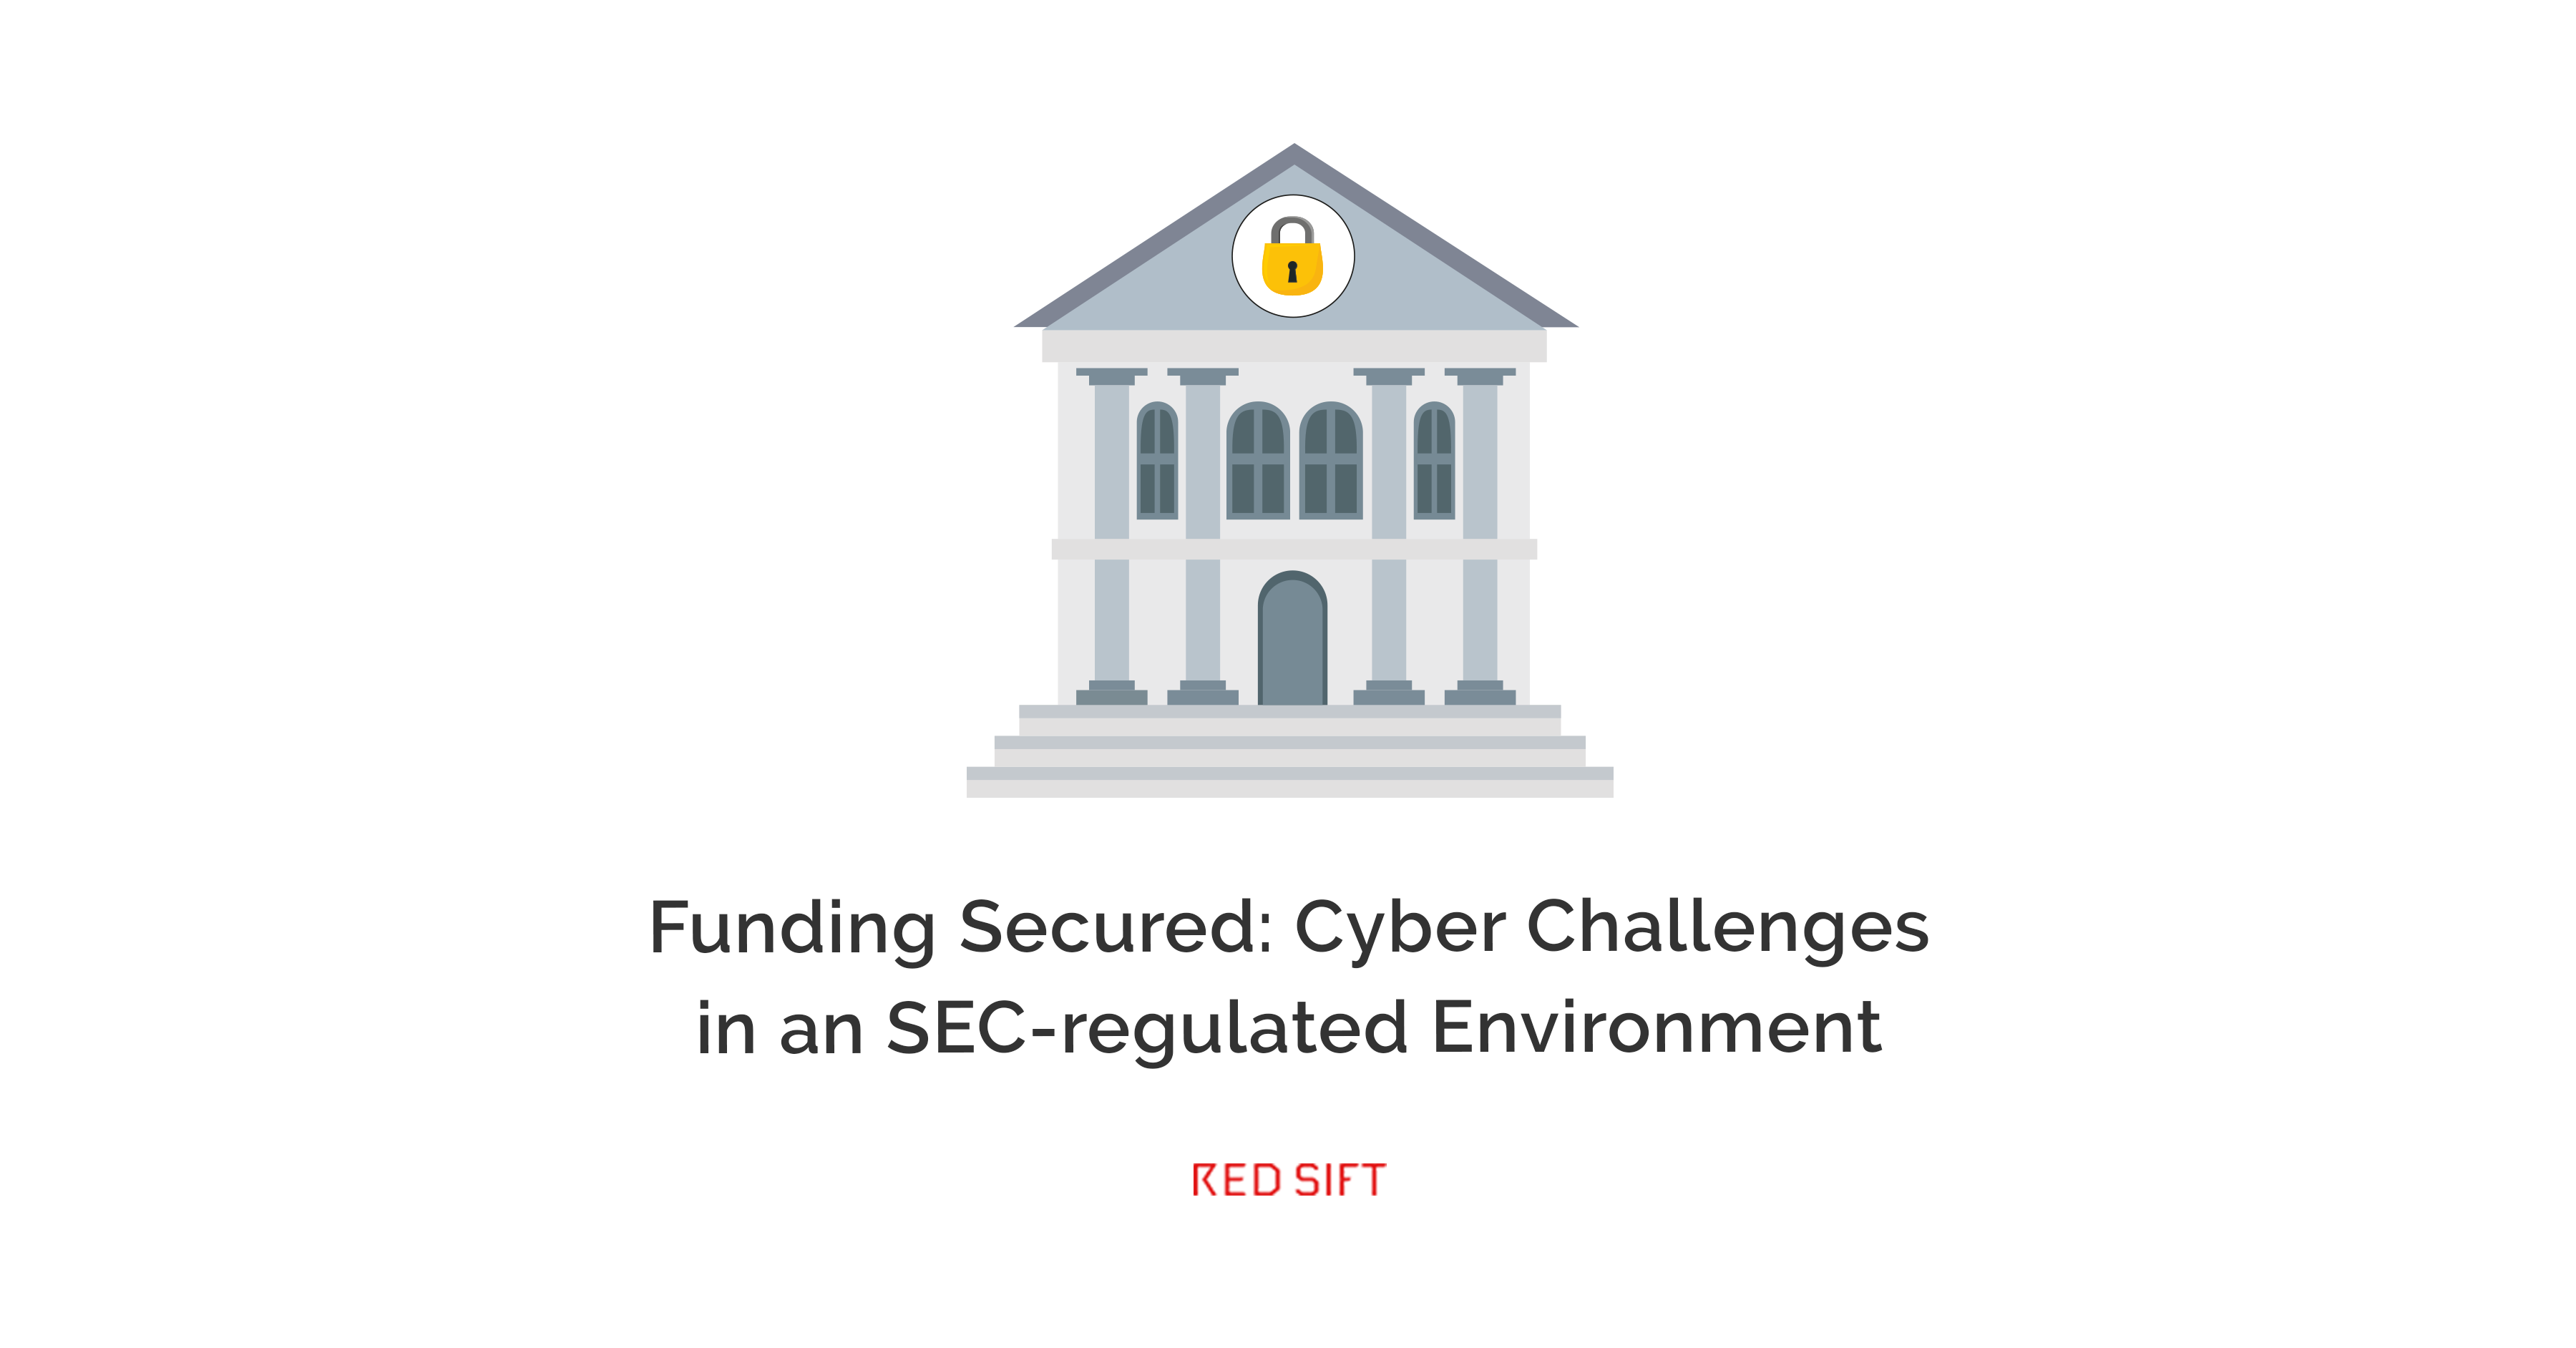 SEC regulated firms currently unprotected